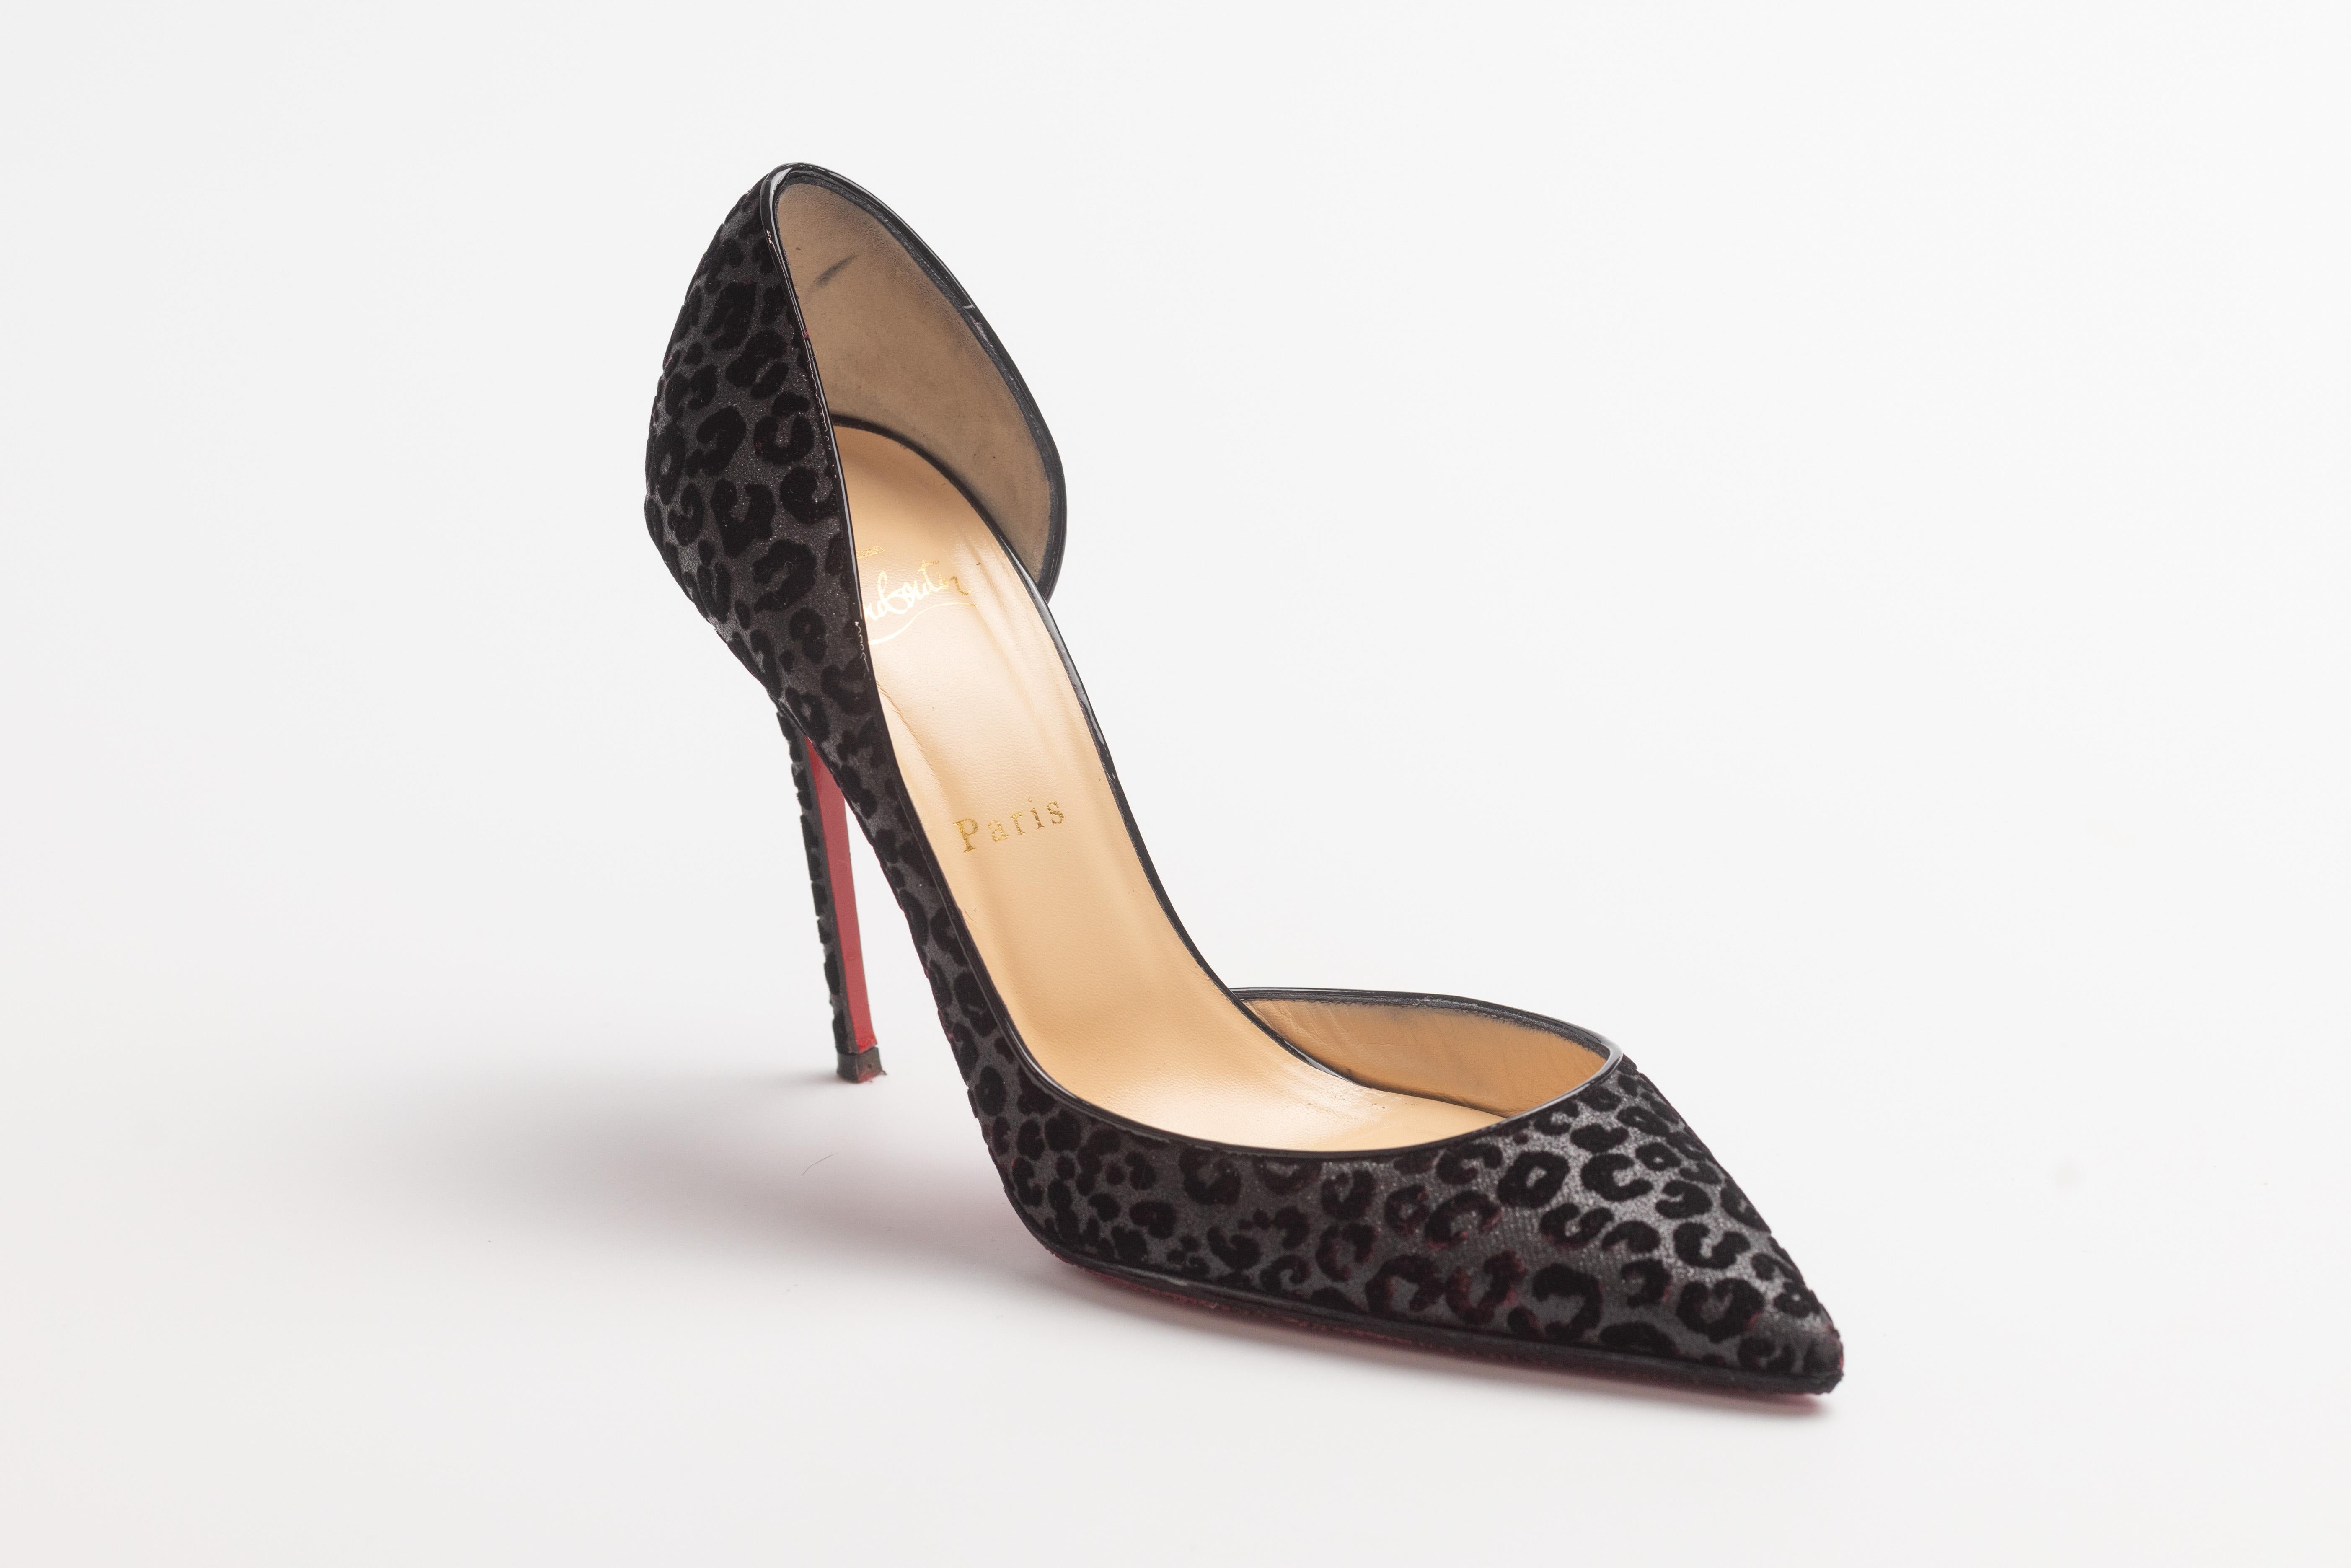 Christian Louboutin Pumps. Black. Glitter & Mesh Accents. Pointed-Toes. Stiletto Heels.

Color: Black
Material: Glitter & Mesh Accents
Size: 39 EU / 8 US
Heel Height: 100 mm / 4”
Condition: Very good.
Comes with: Dust bag

Made in Italy